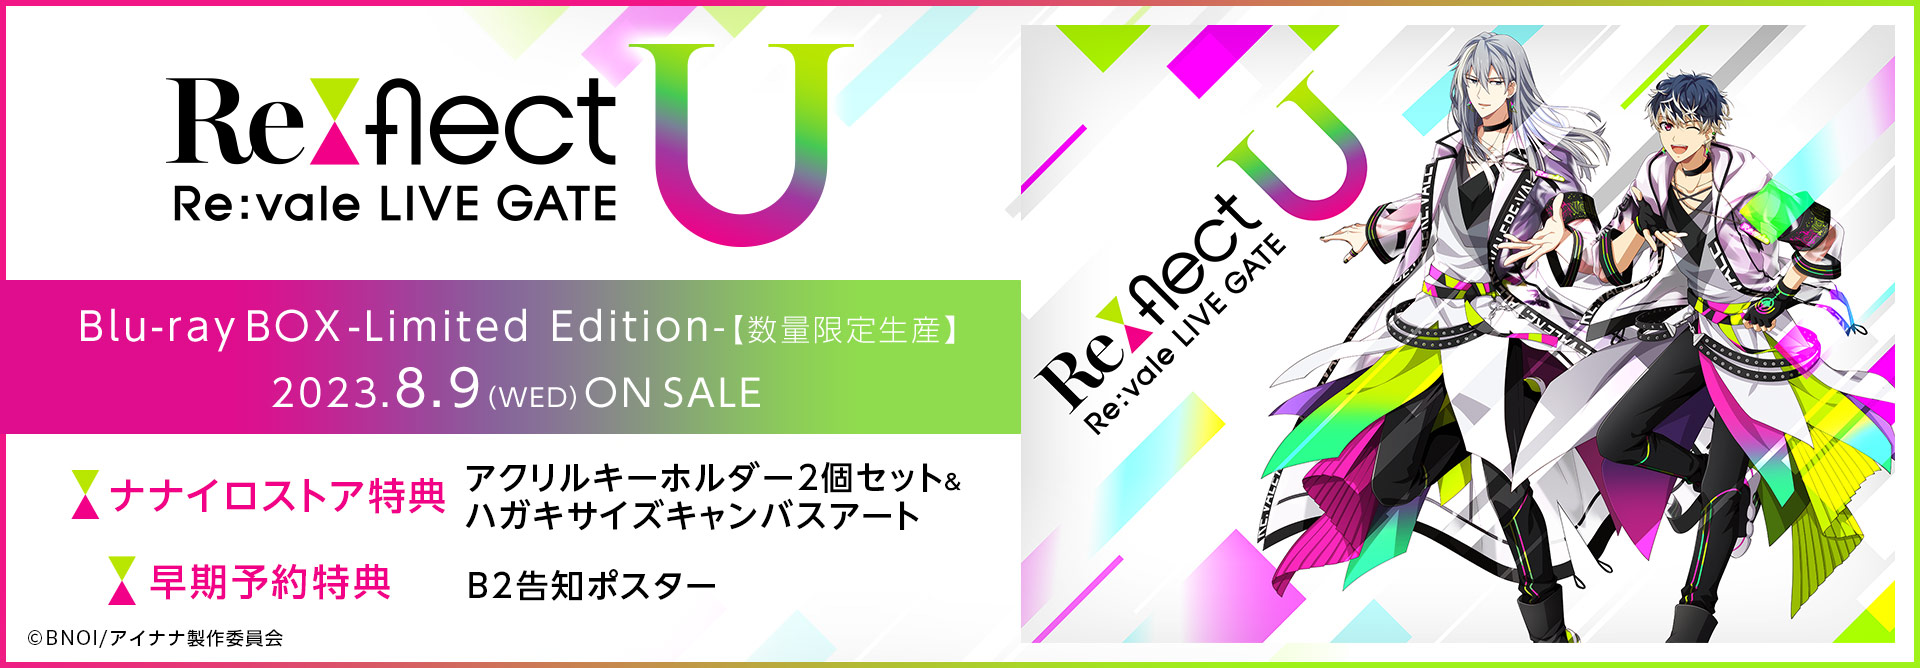 Re:vale LIVE GATE “Re:flect U”Blu-ray BOX -Limited Edition-【数量限定生産】